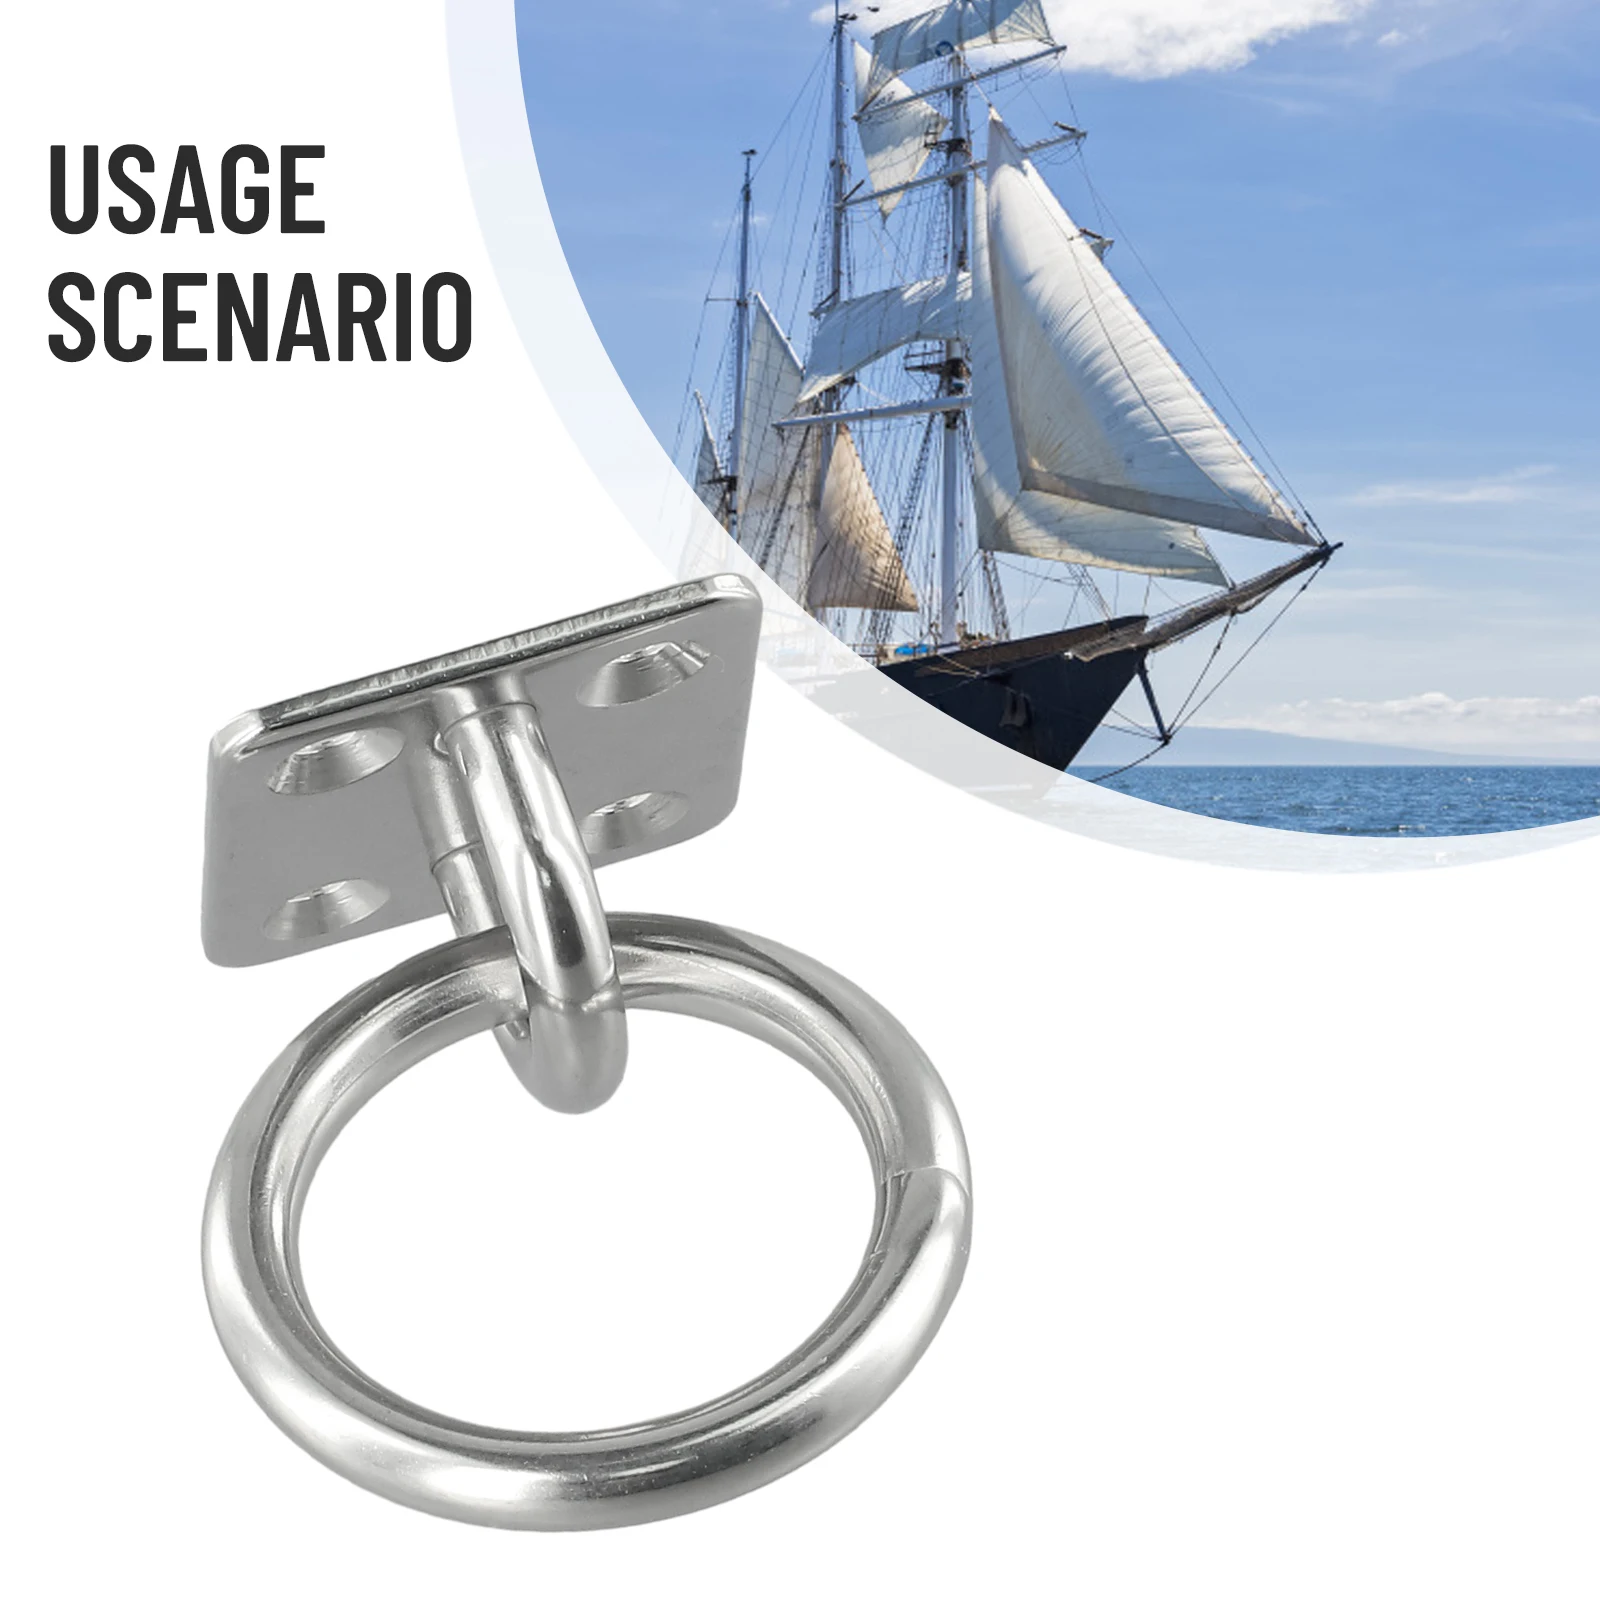 1PCS 304 Grade Stainless Steel Marine Eye Plate With Ring (Lashing Tie Down Boat Yacht) 6mm Square with ring (M6) boat accessori